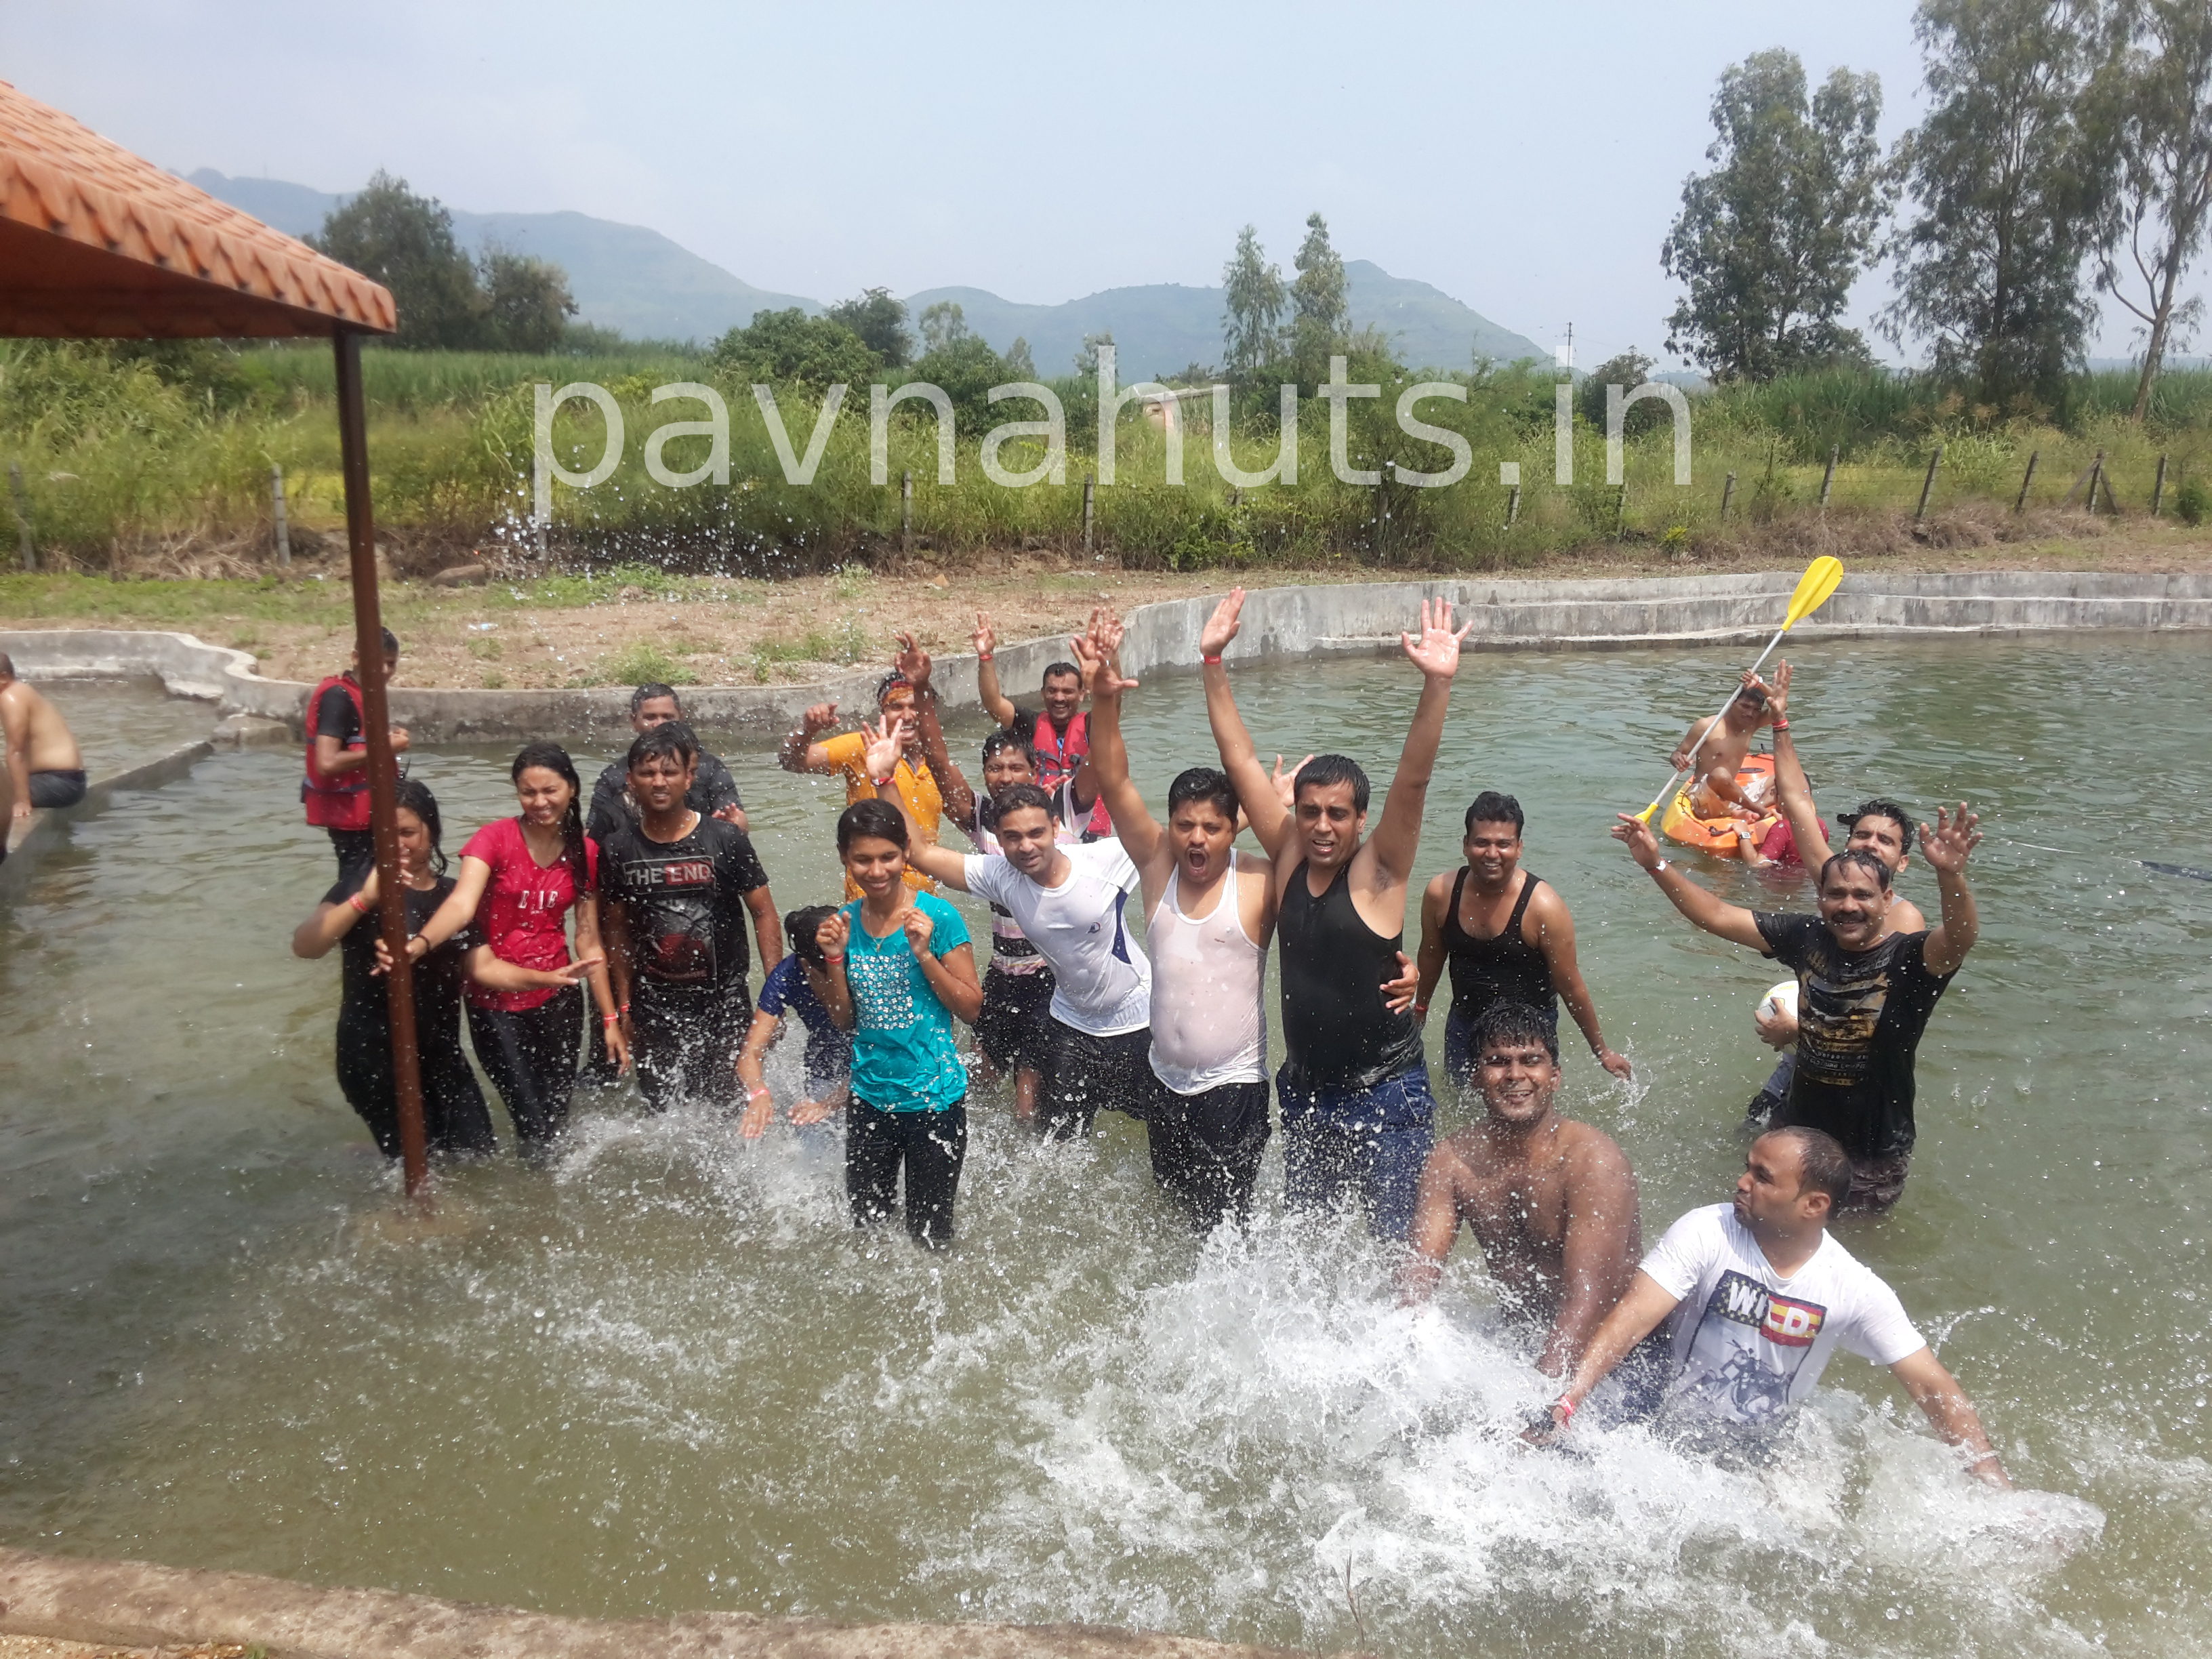 Picnic Spots Near Pune For 1 Day In Summer Pavnahuts Official Website Best 1 Day Picnic Spots Near Pune Mumbai Picnic Places Around Mumbai Pune Picnic